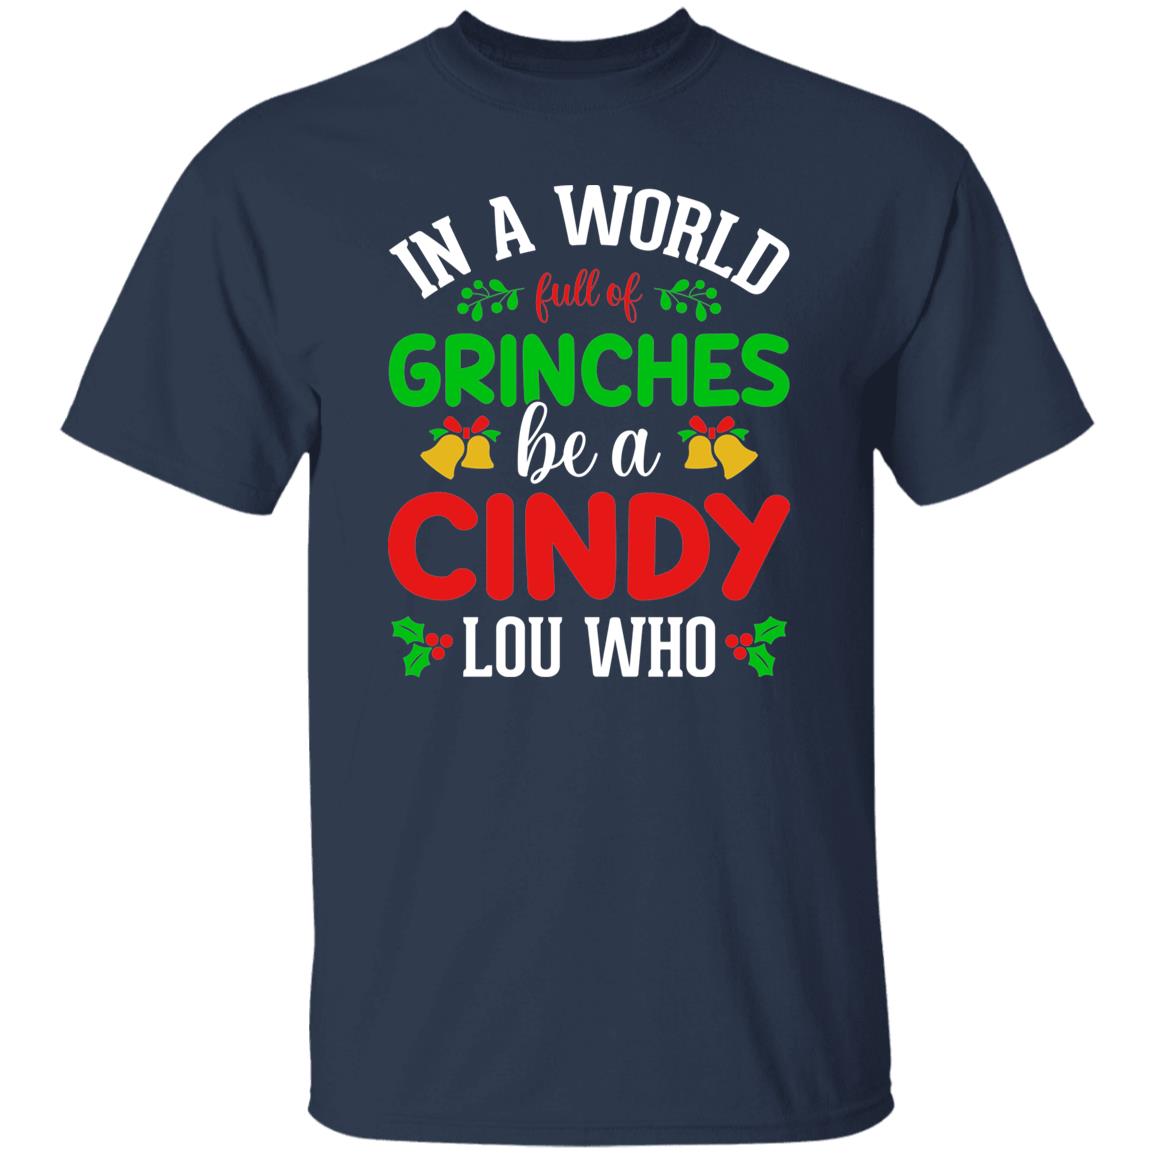 In a World Full of Grinches be a Cindy Lou Who Funny Christmas Tee